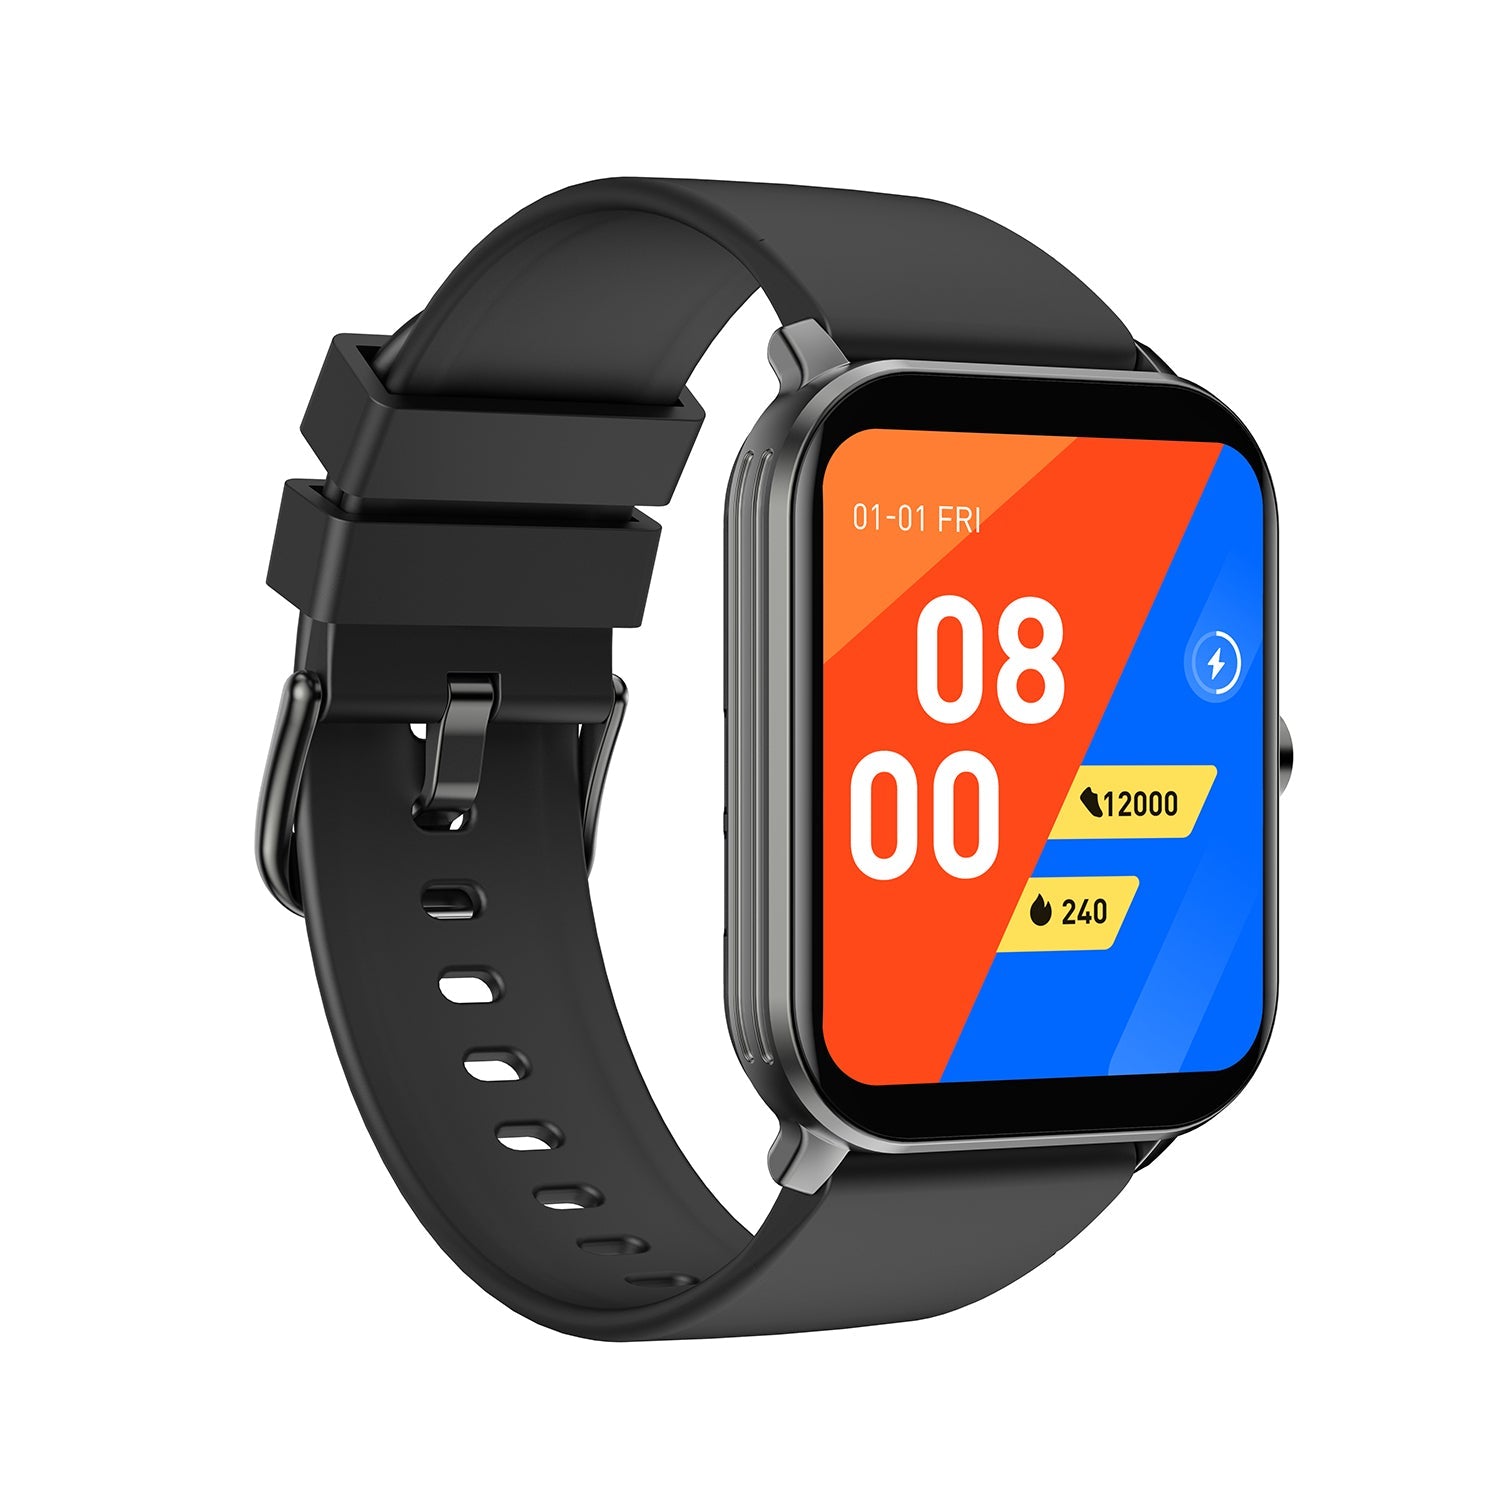 Gizmore 910 Ultra 4.29 Cm (1.69) IPS Full Tocuh Big Display With 2.5D Curved Glass Smartwatch